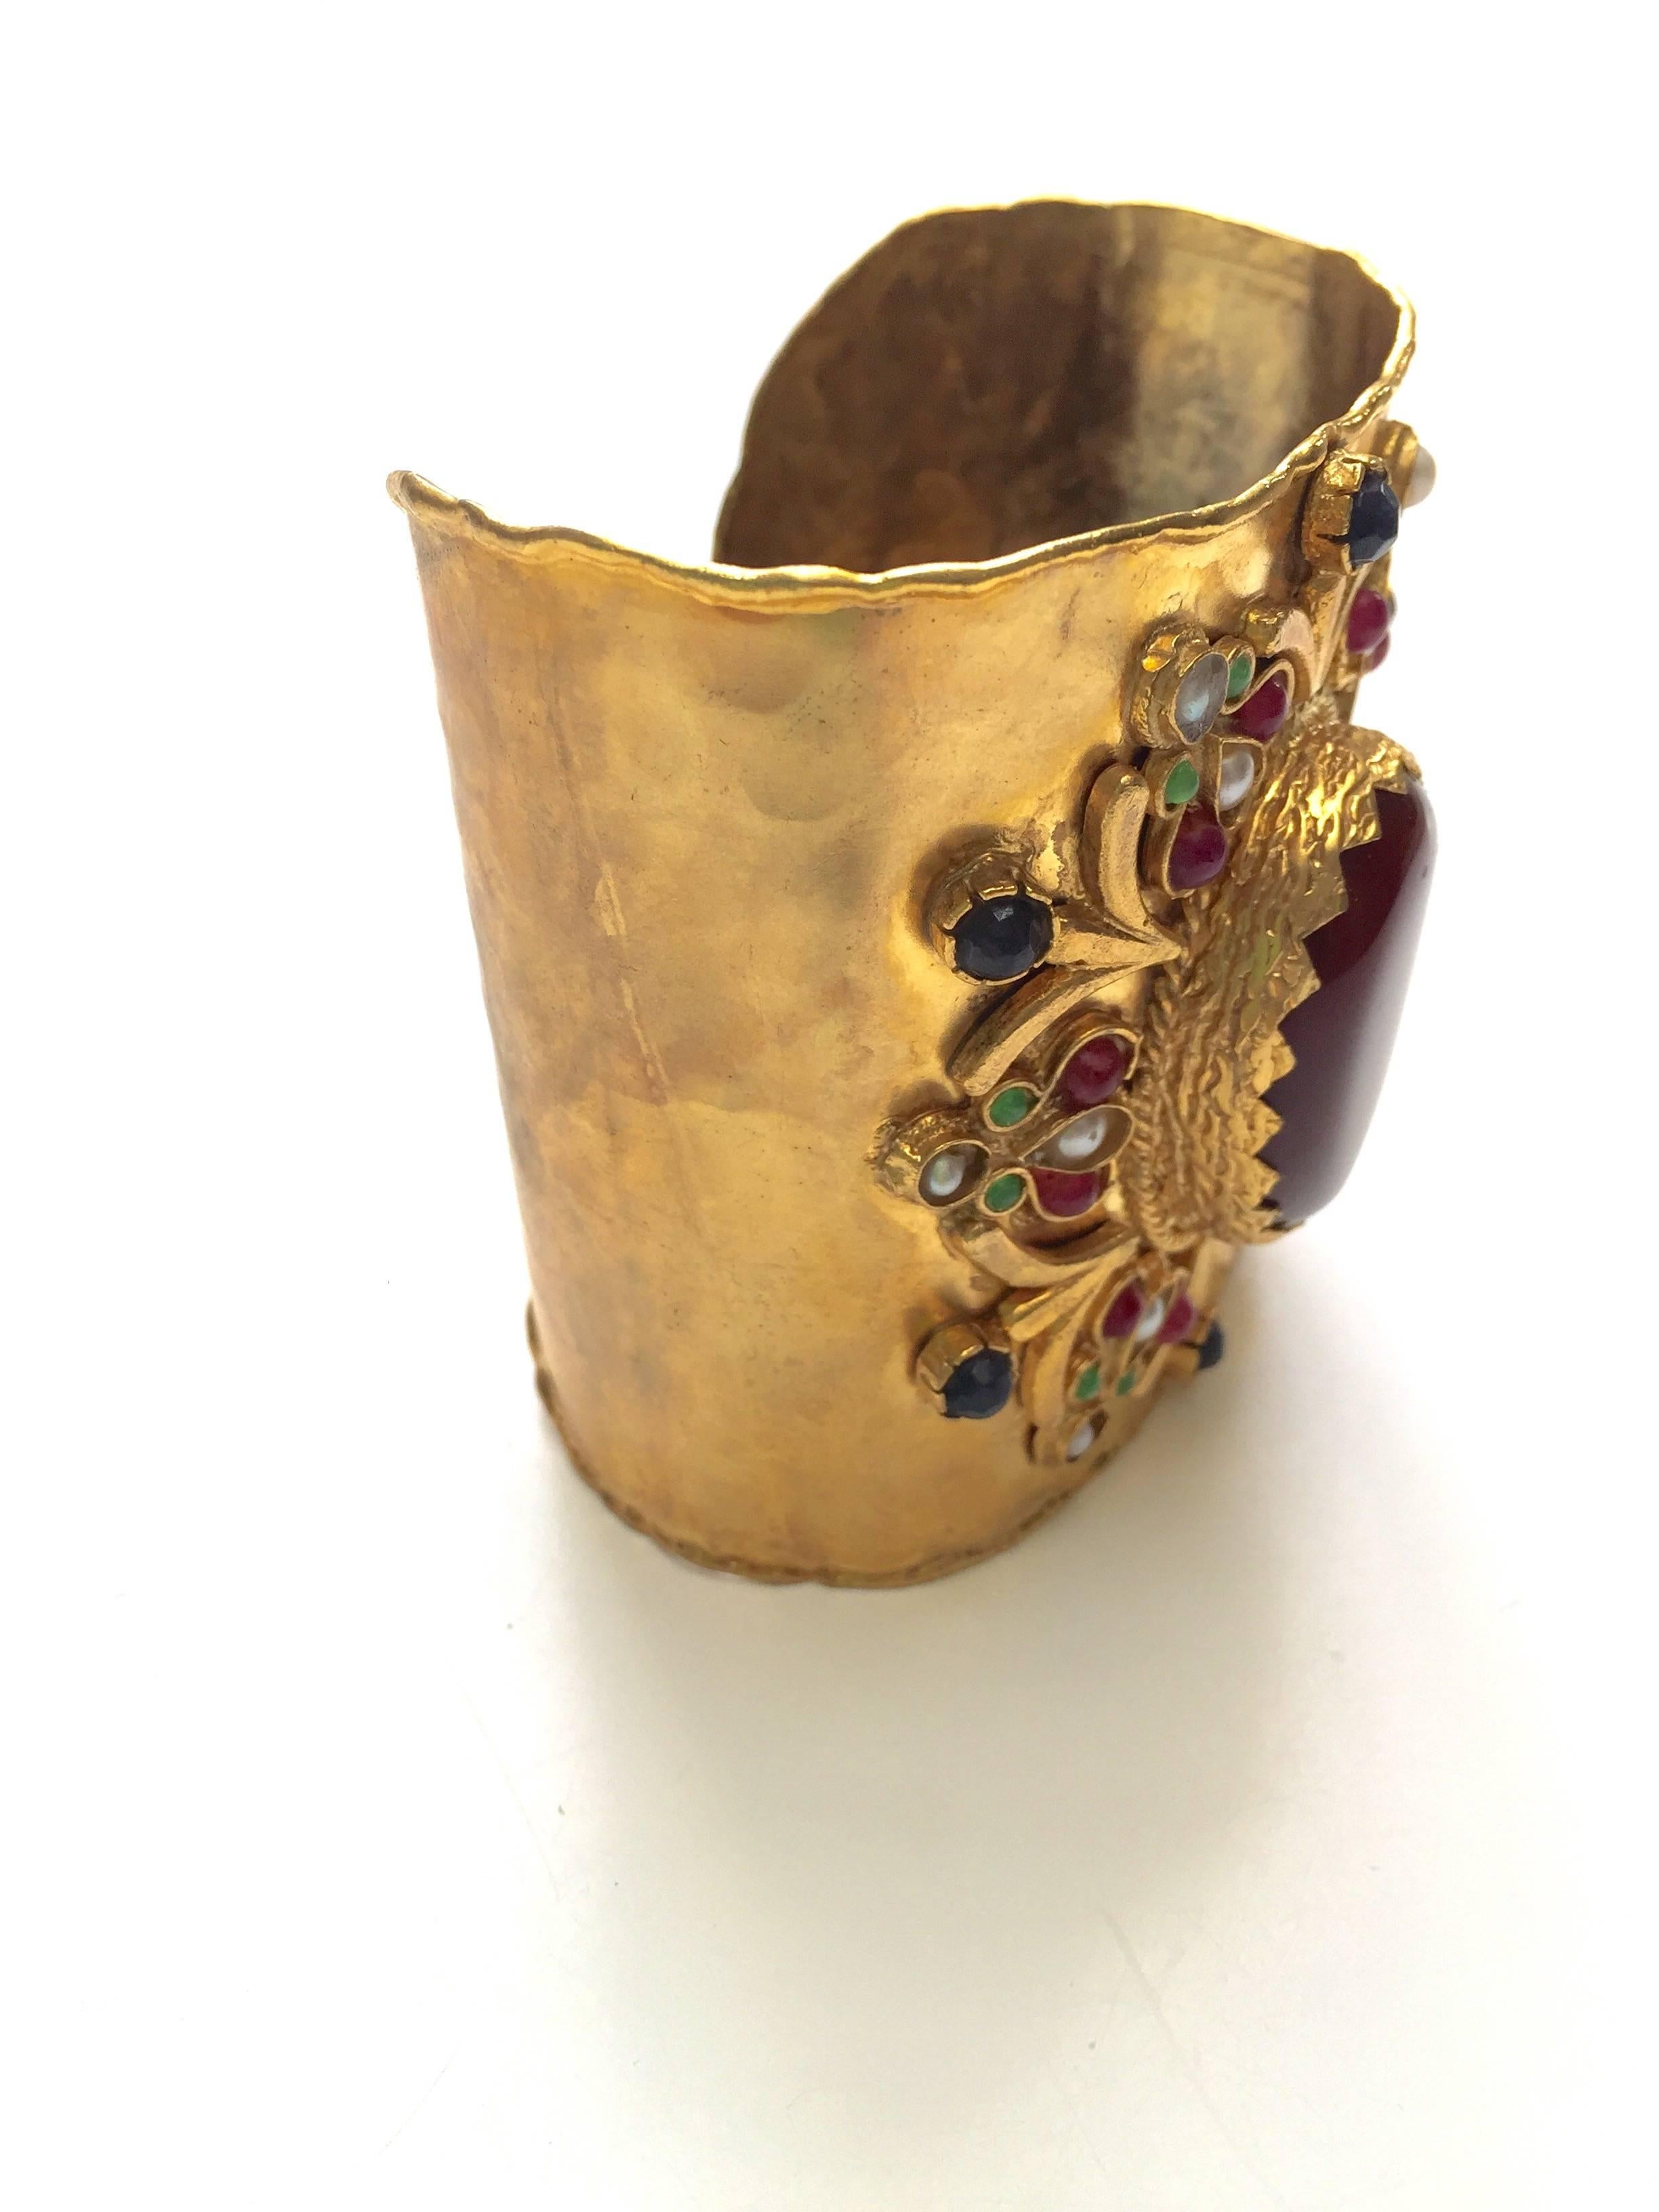 This gold plated cuff has a gorgeous brown agate centre stone, decorated then with little pearls and semi precious colored stones to create a beautiful pattern. It was made in Afghanistan by local craftsmen and makes a perfect accessory or the ideal